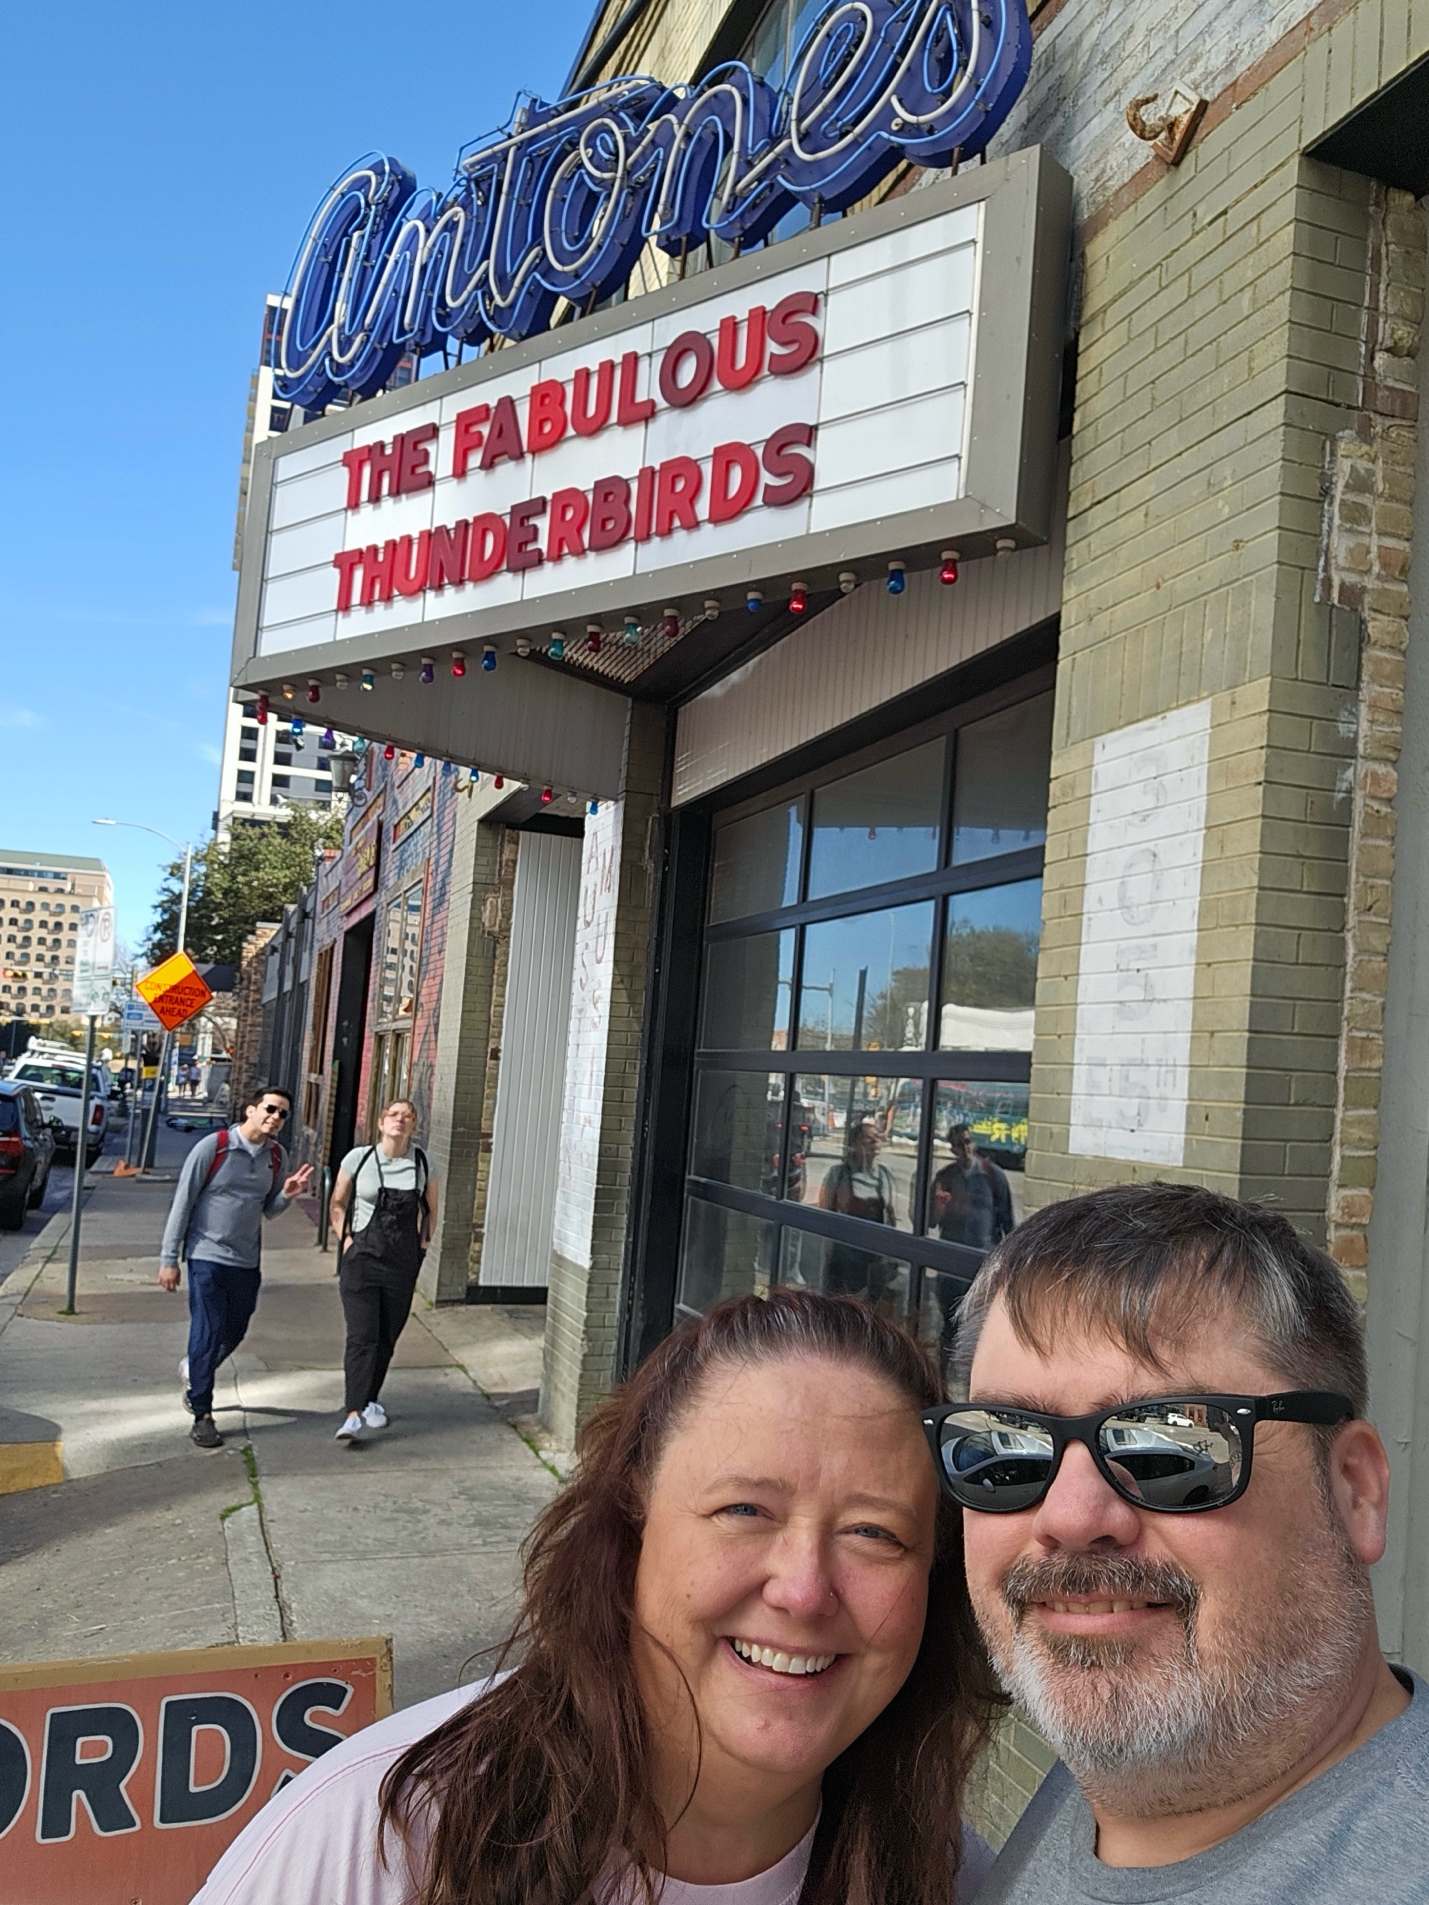 A person and person taking a selfie in front of a sign

Description automatically generated